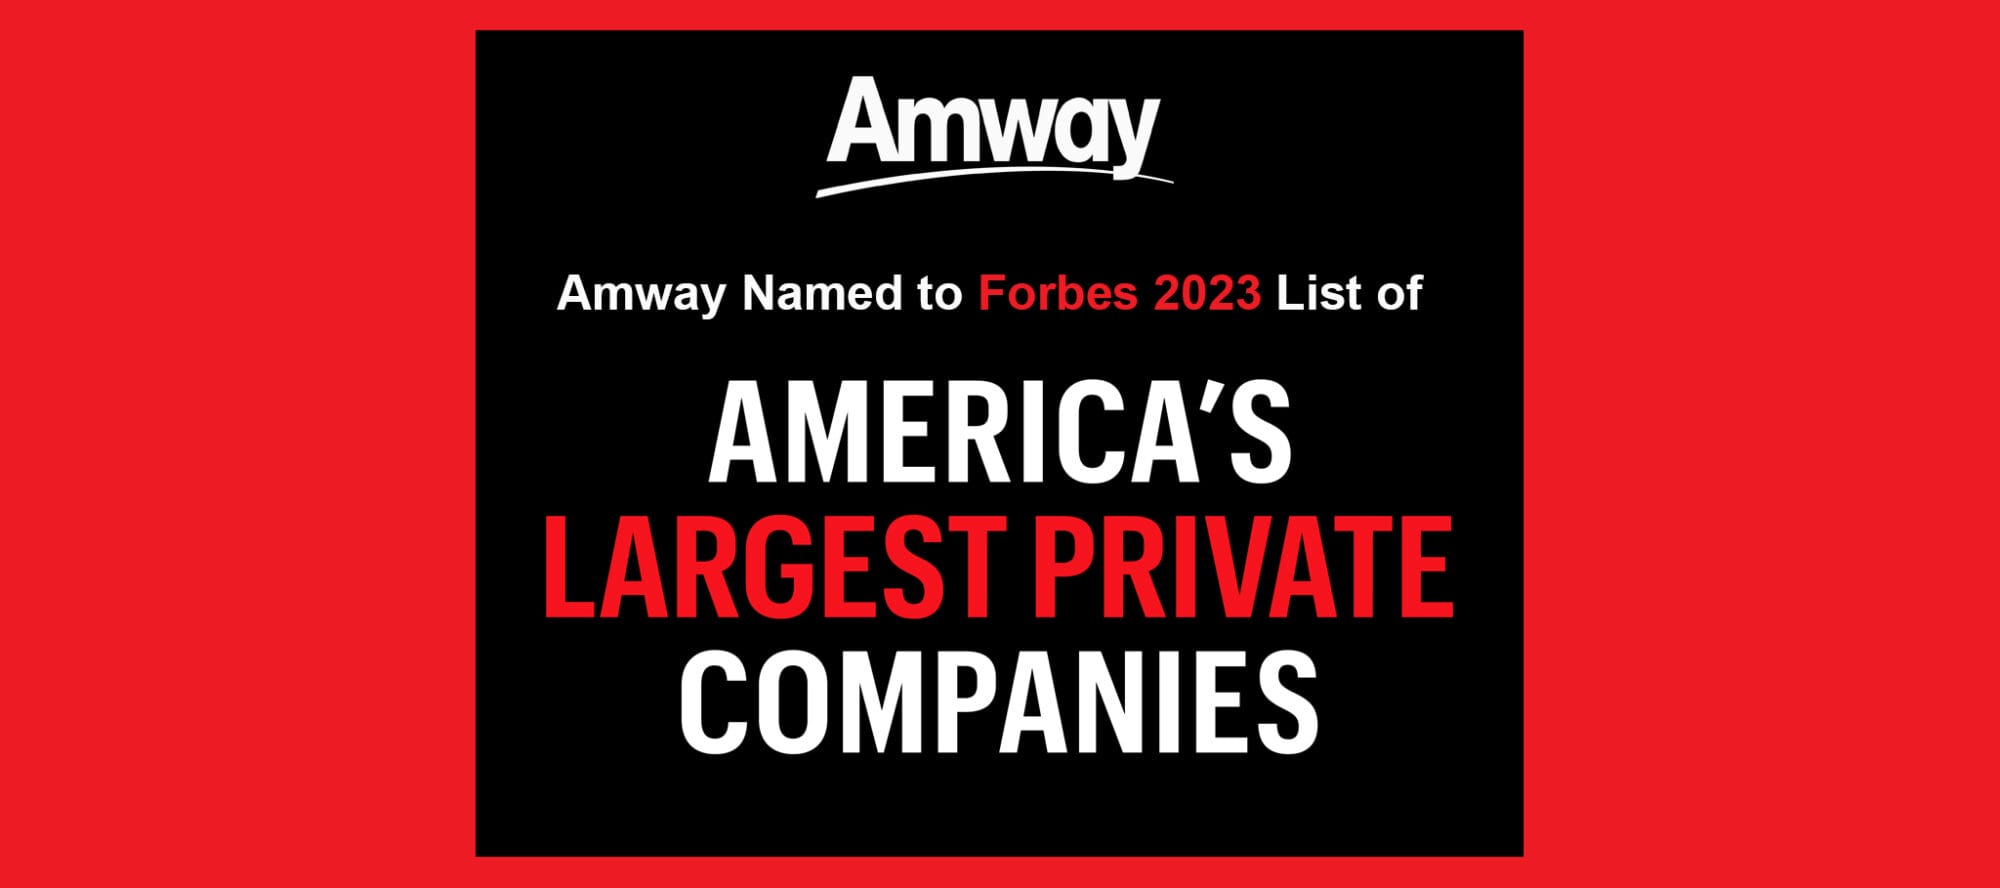 Amway Named to Forbes America's Largest Private Companies List